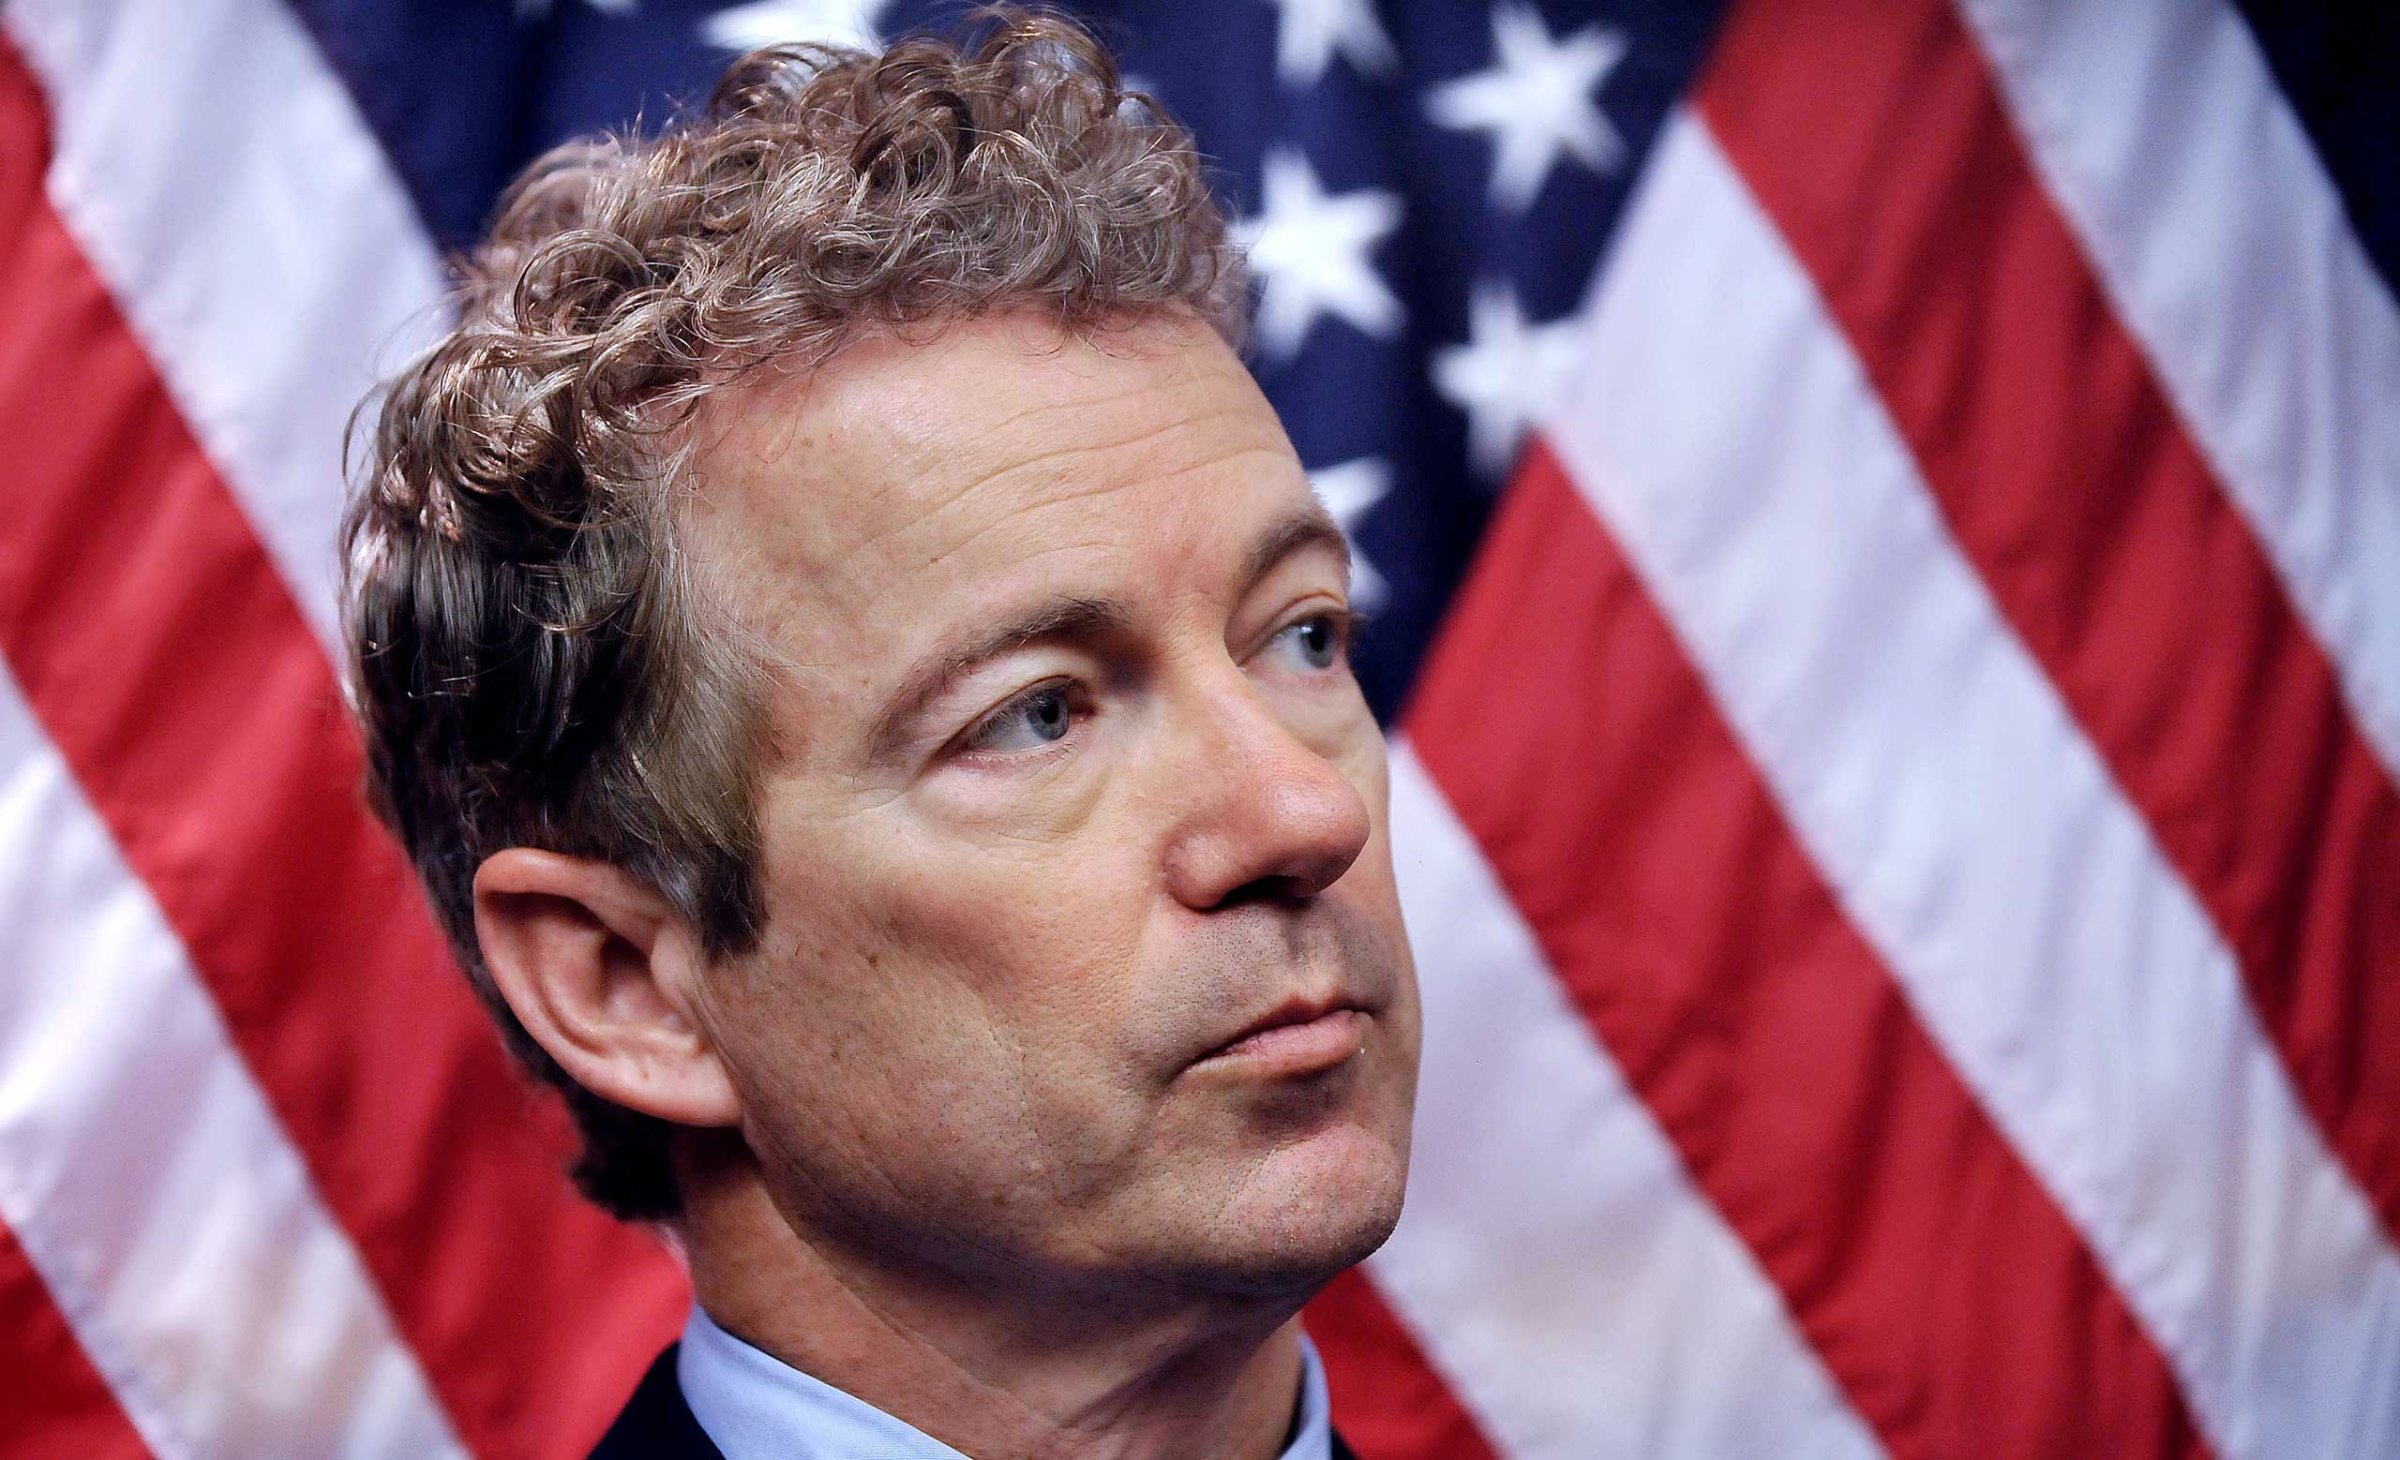 Sen. Rand Paul (R-Ky.) looks on at a press conference to discuss "The Compassionate Access, Research Expansion and Respect States (CARERS) Act" in Washington on March 10, 2015.